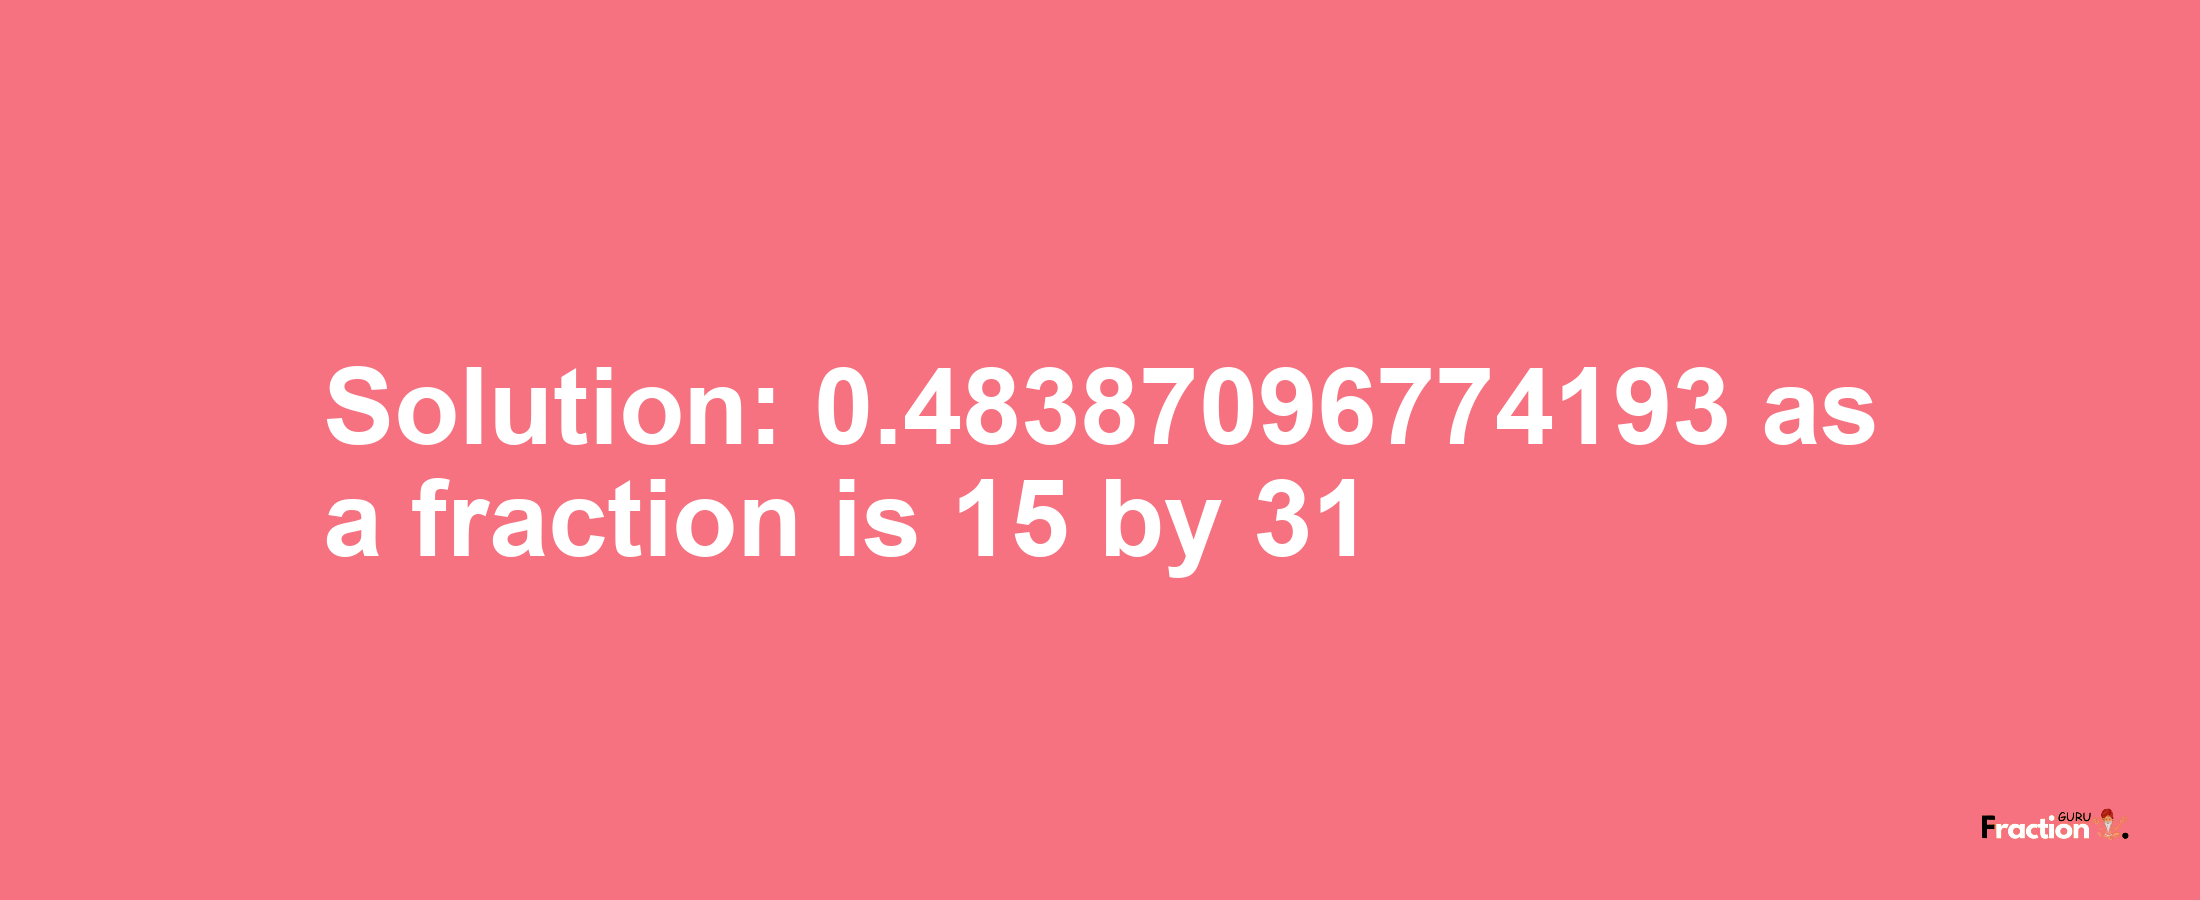 Solution:0.48387096774193 as a fraction is 15/31